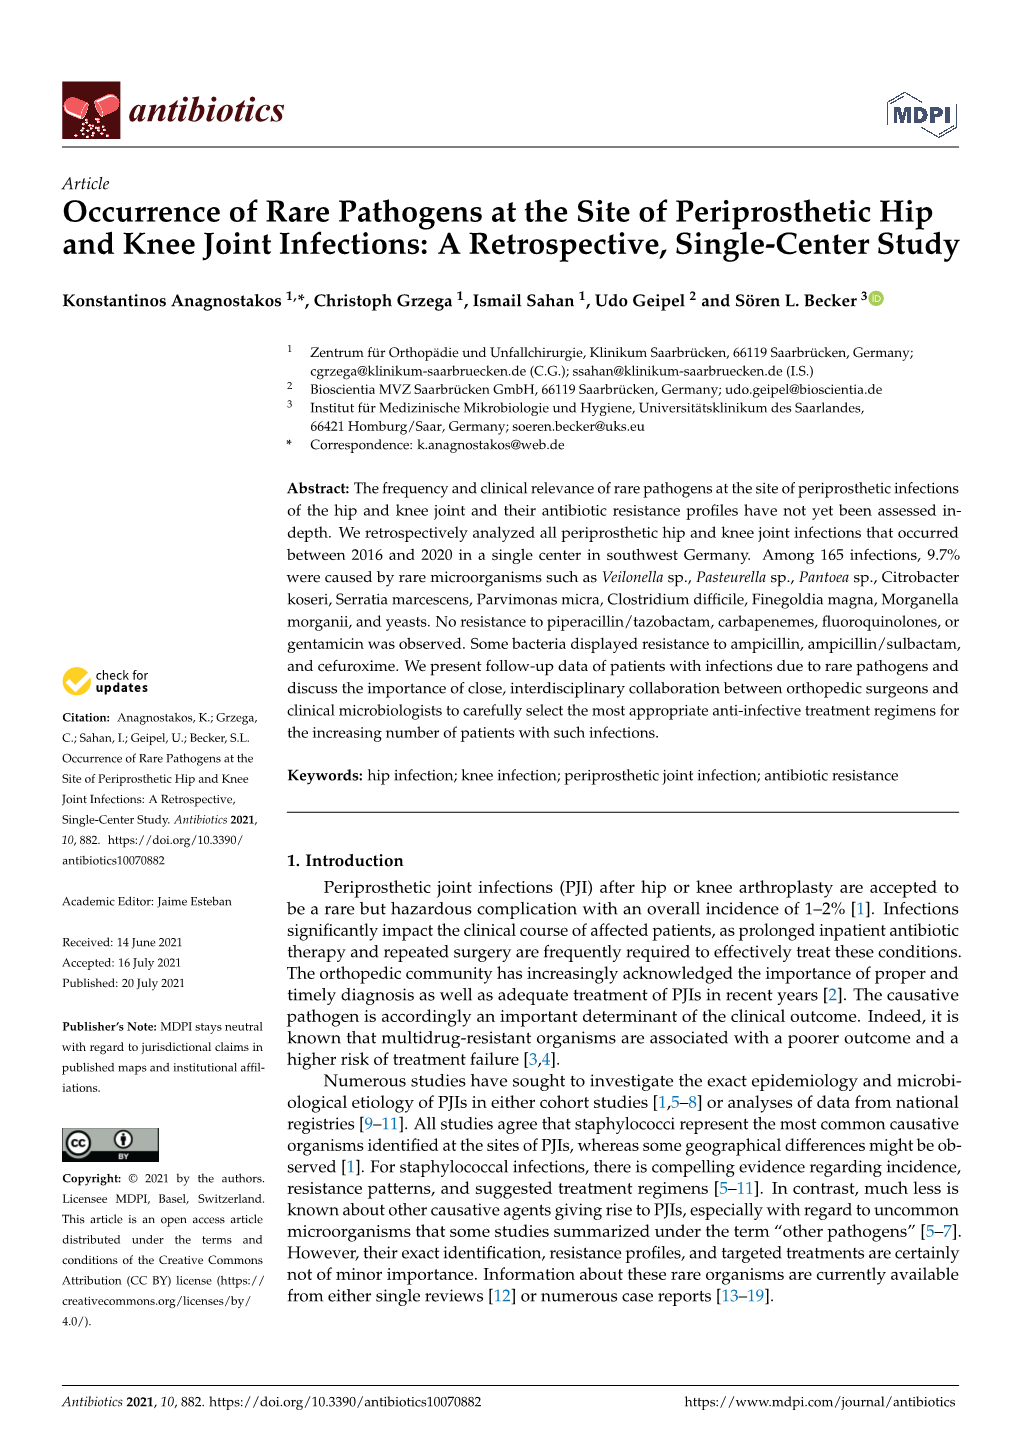 Occurrence of Rare Pathogens at the Site of Periprosthetic Hip and Knee Joint Infections: a Retrospective, Single-Center Study